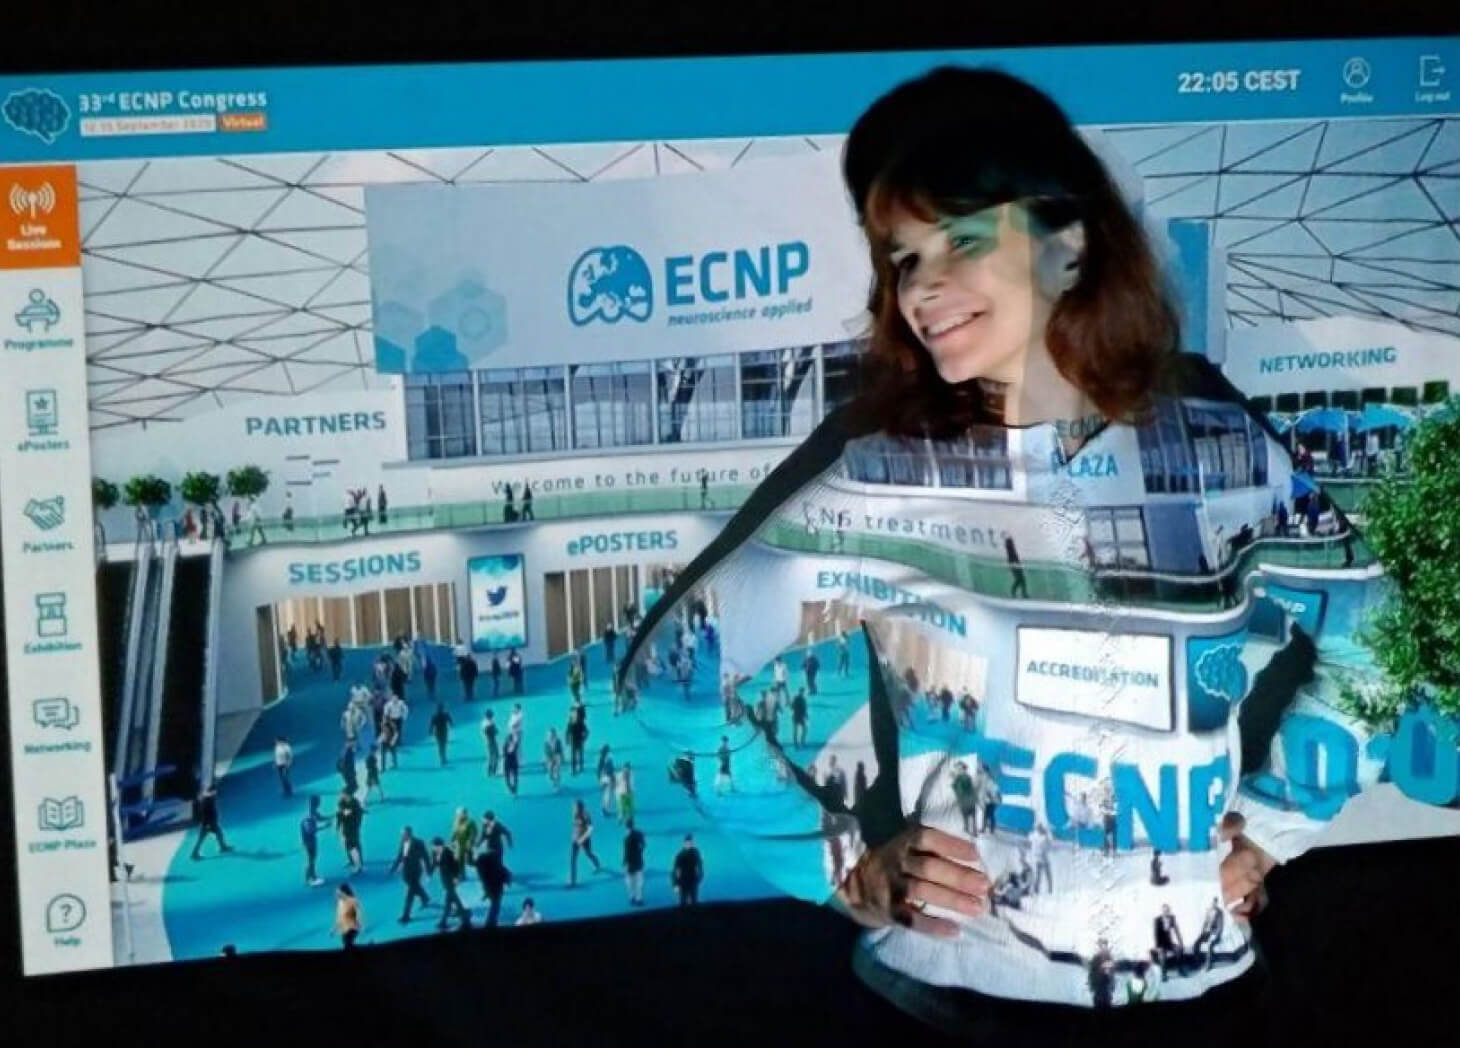 ECNP virtual congress live with woman in front of the image